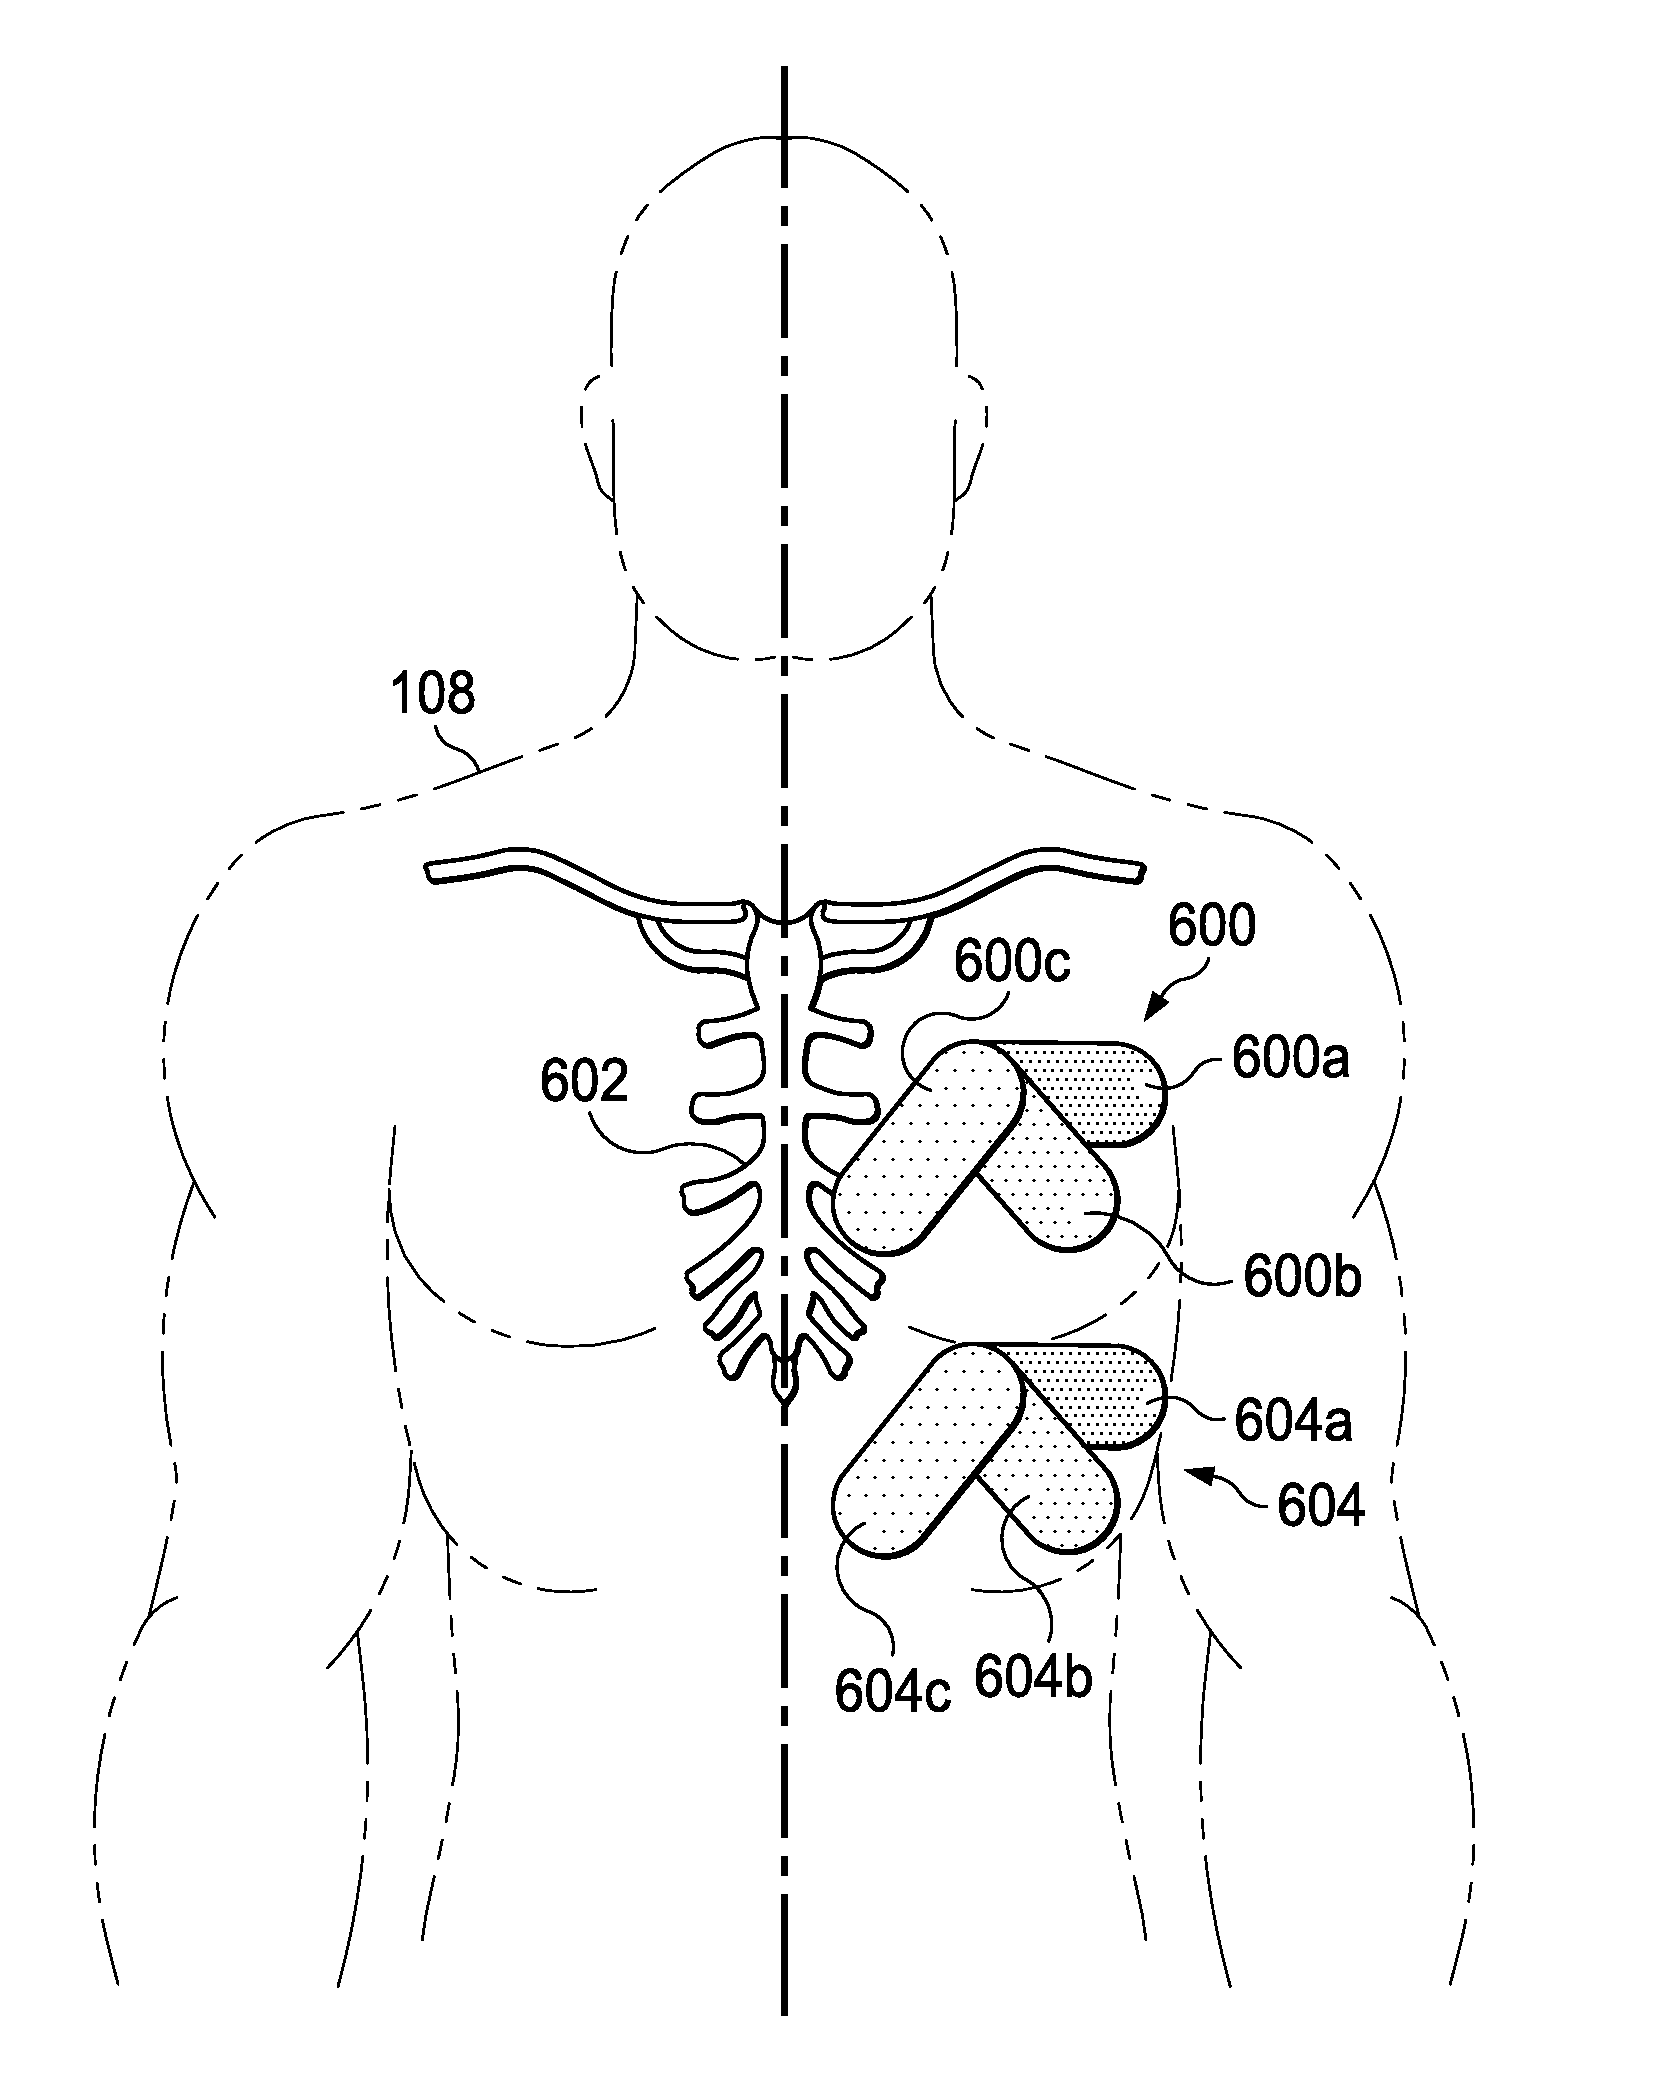 Motion-based seizure detection systems and methods